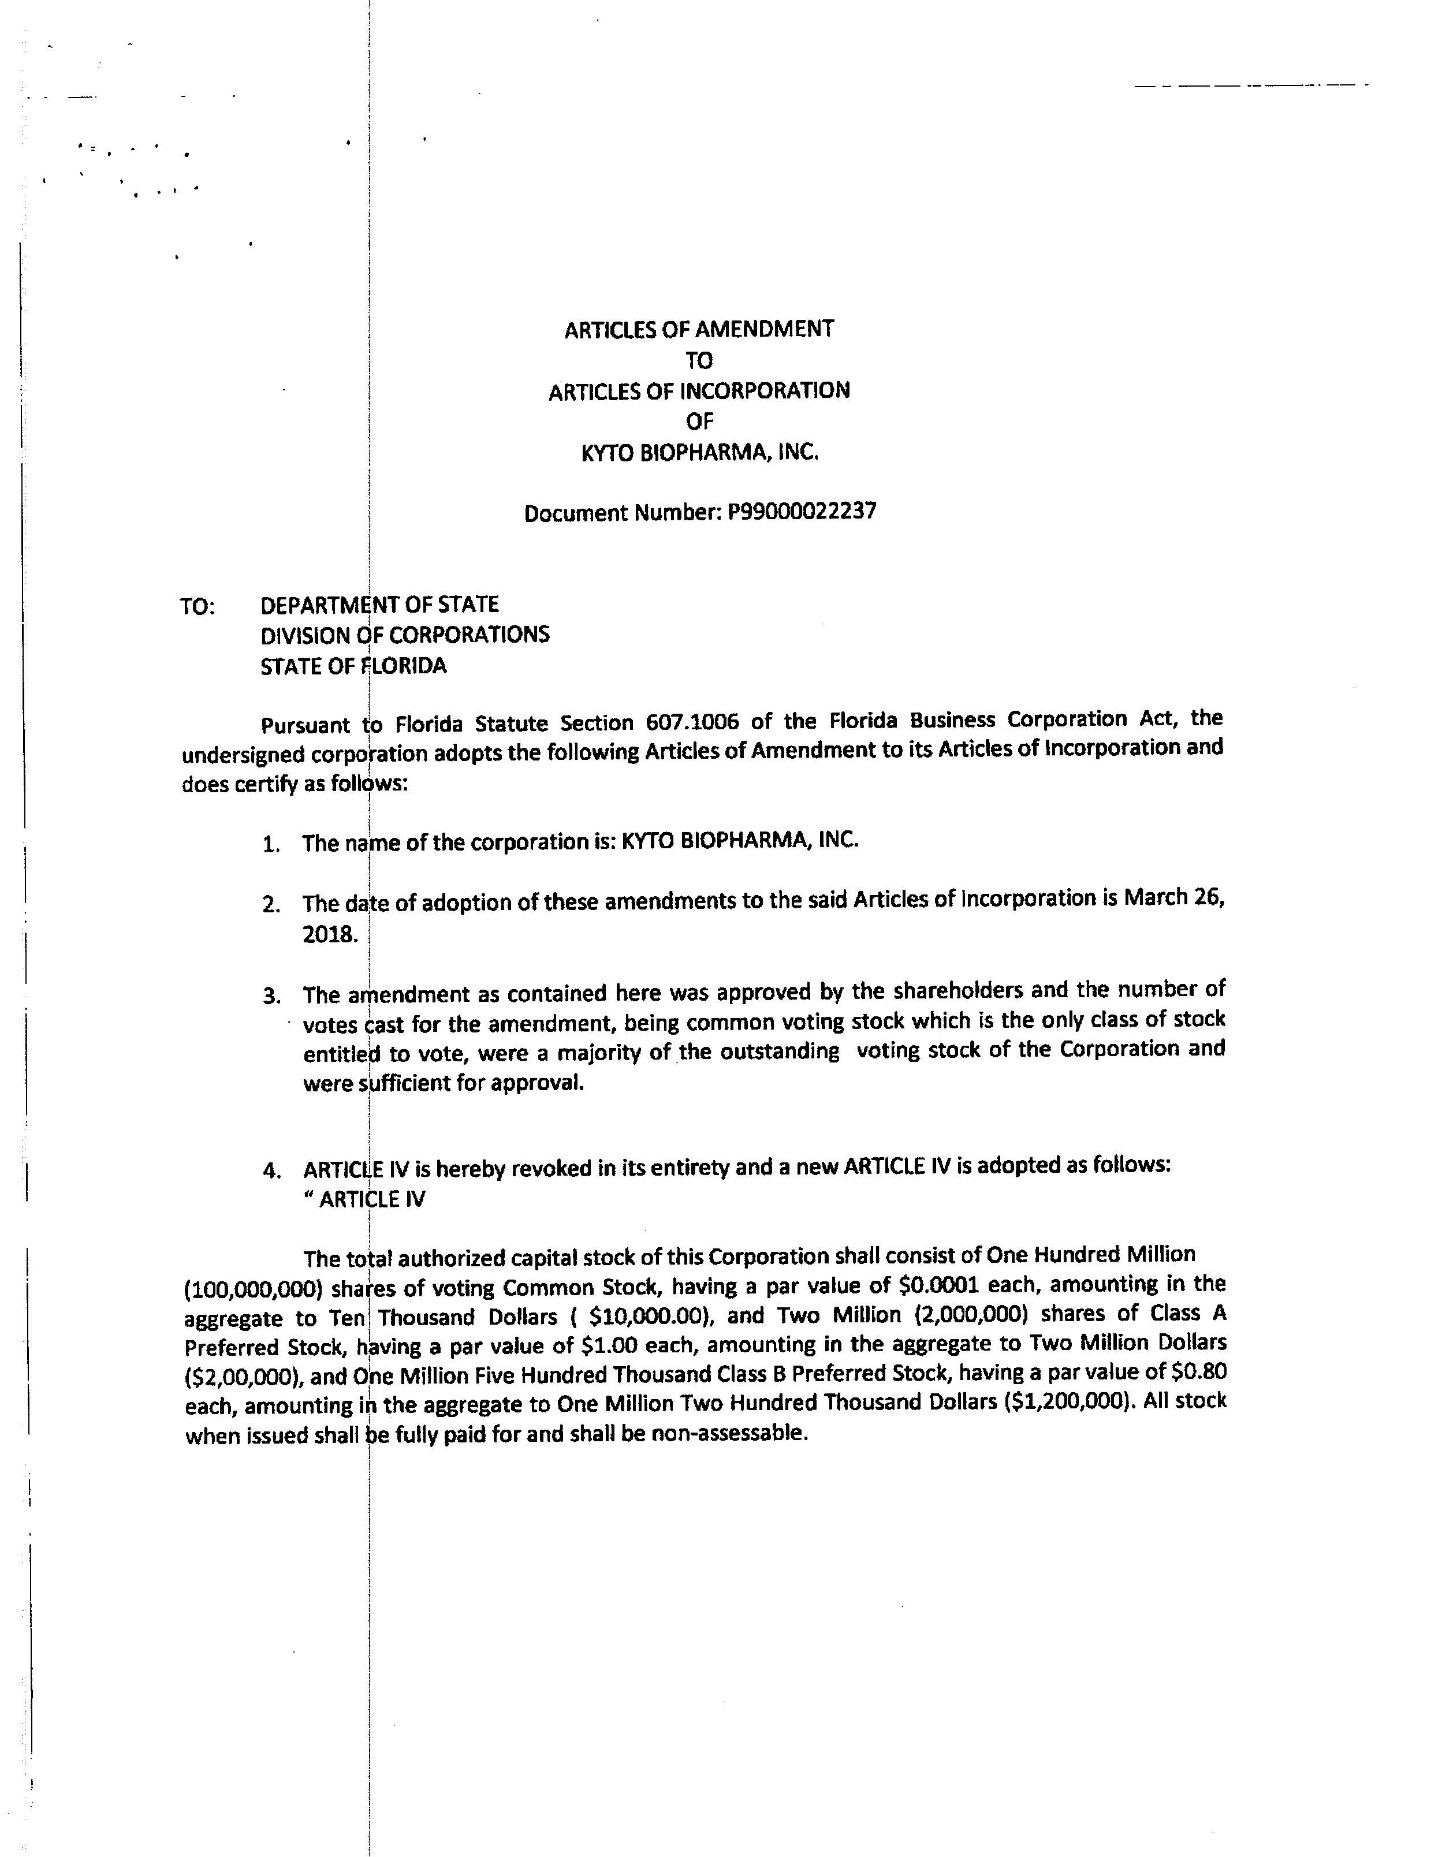 Third Amended Articles of Incorporation_Page_06.jpg